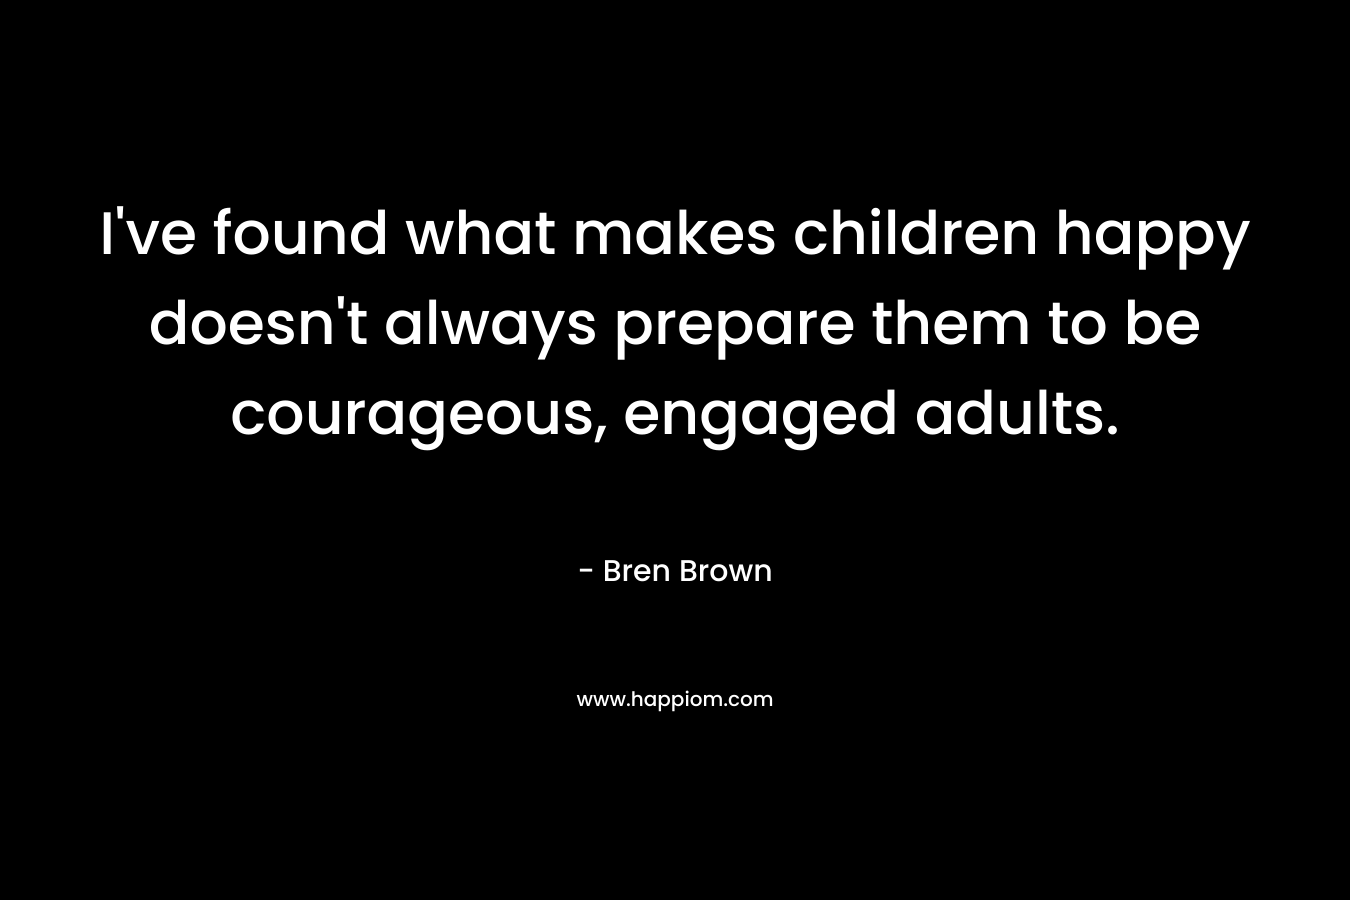 I’ve found what makes children happy doesn’t always prepare them to be courageous, engaged adults. – Bren Brown